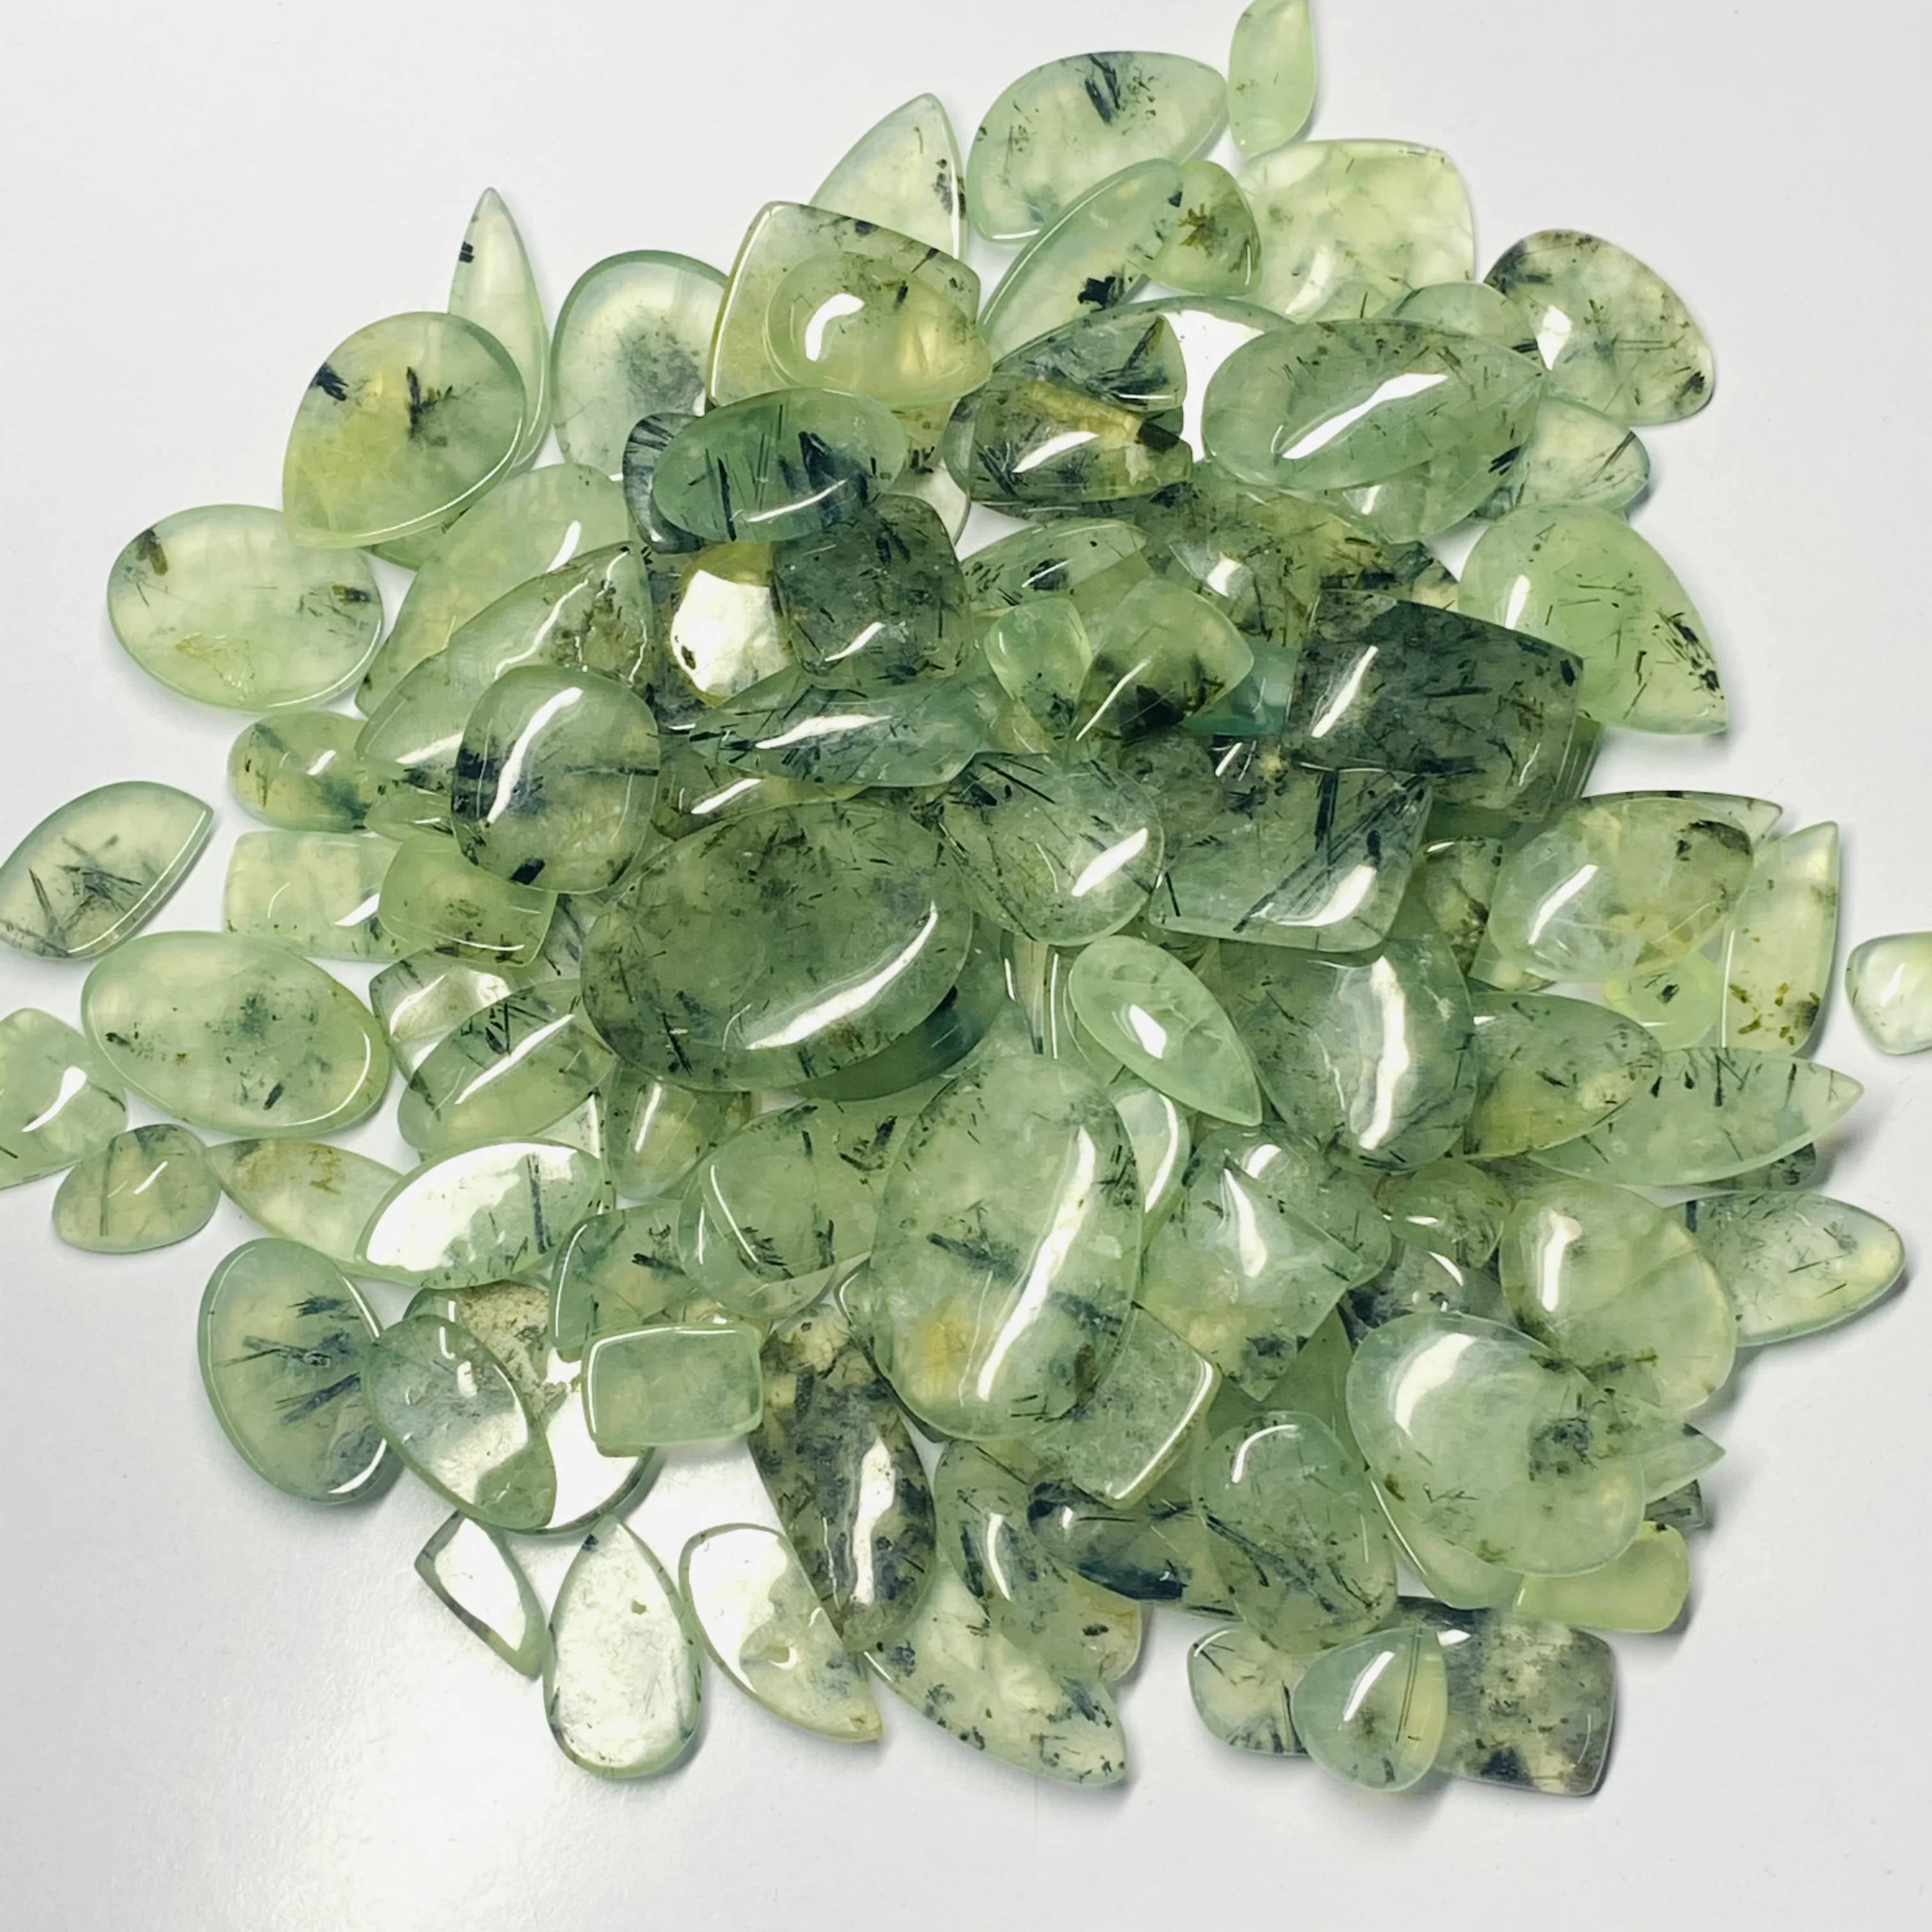 Details about   Rarest Lot Natural Prehnite 7X7 mm Square Faceted Cut Loose Gemstone 